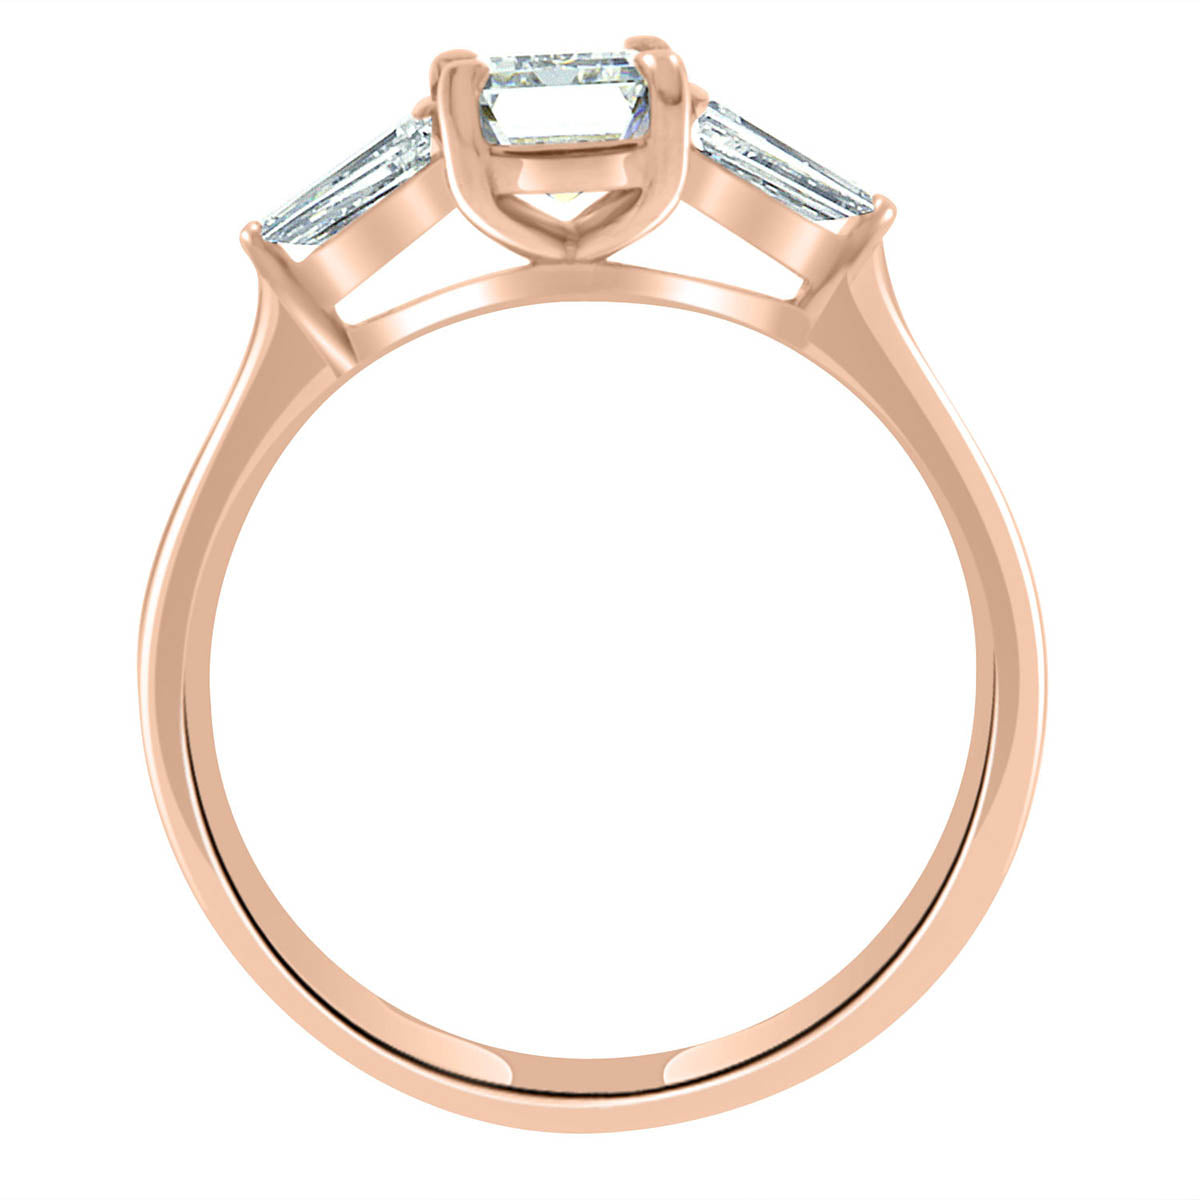 Emerald Cut With Tapered Baguettes in rose gold standing upright